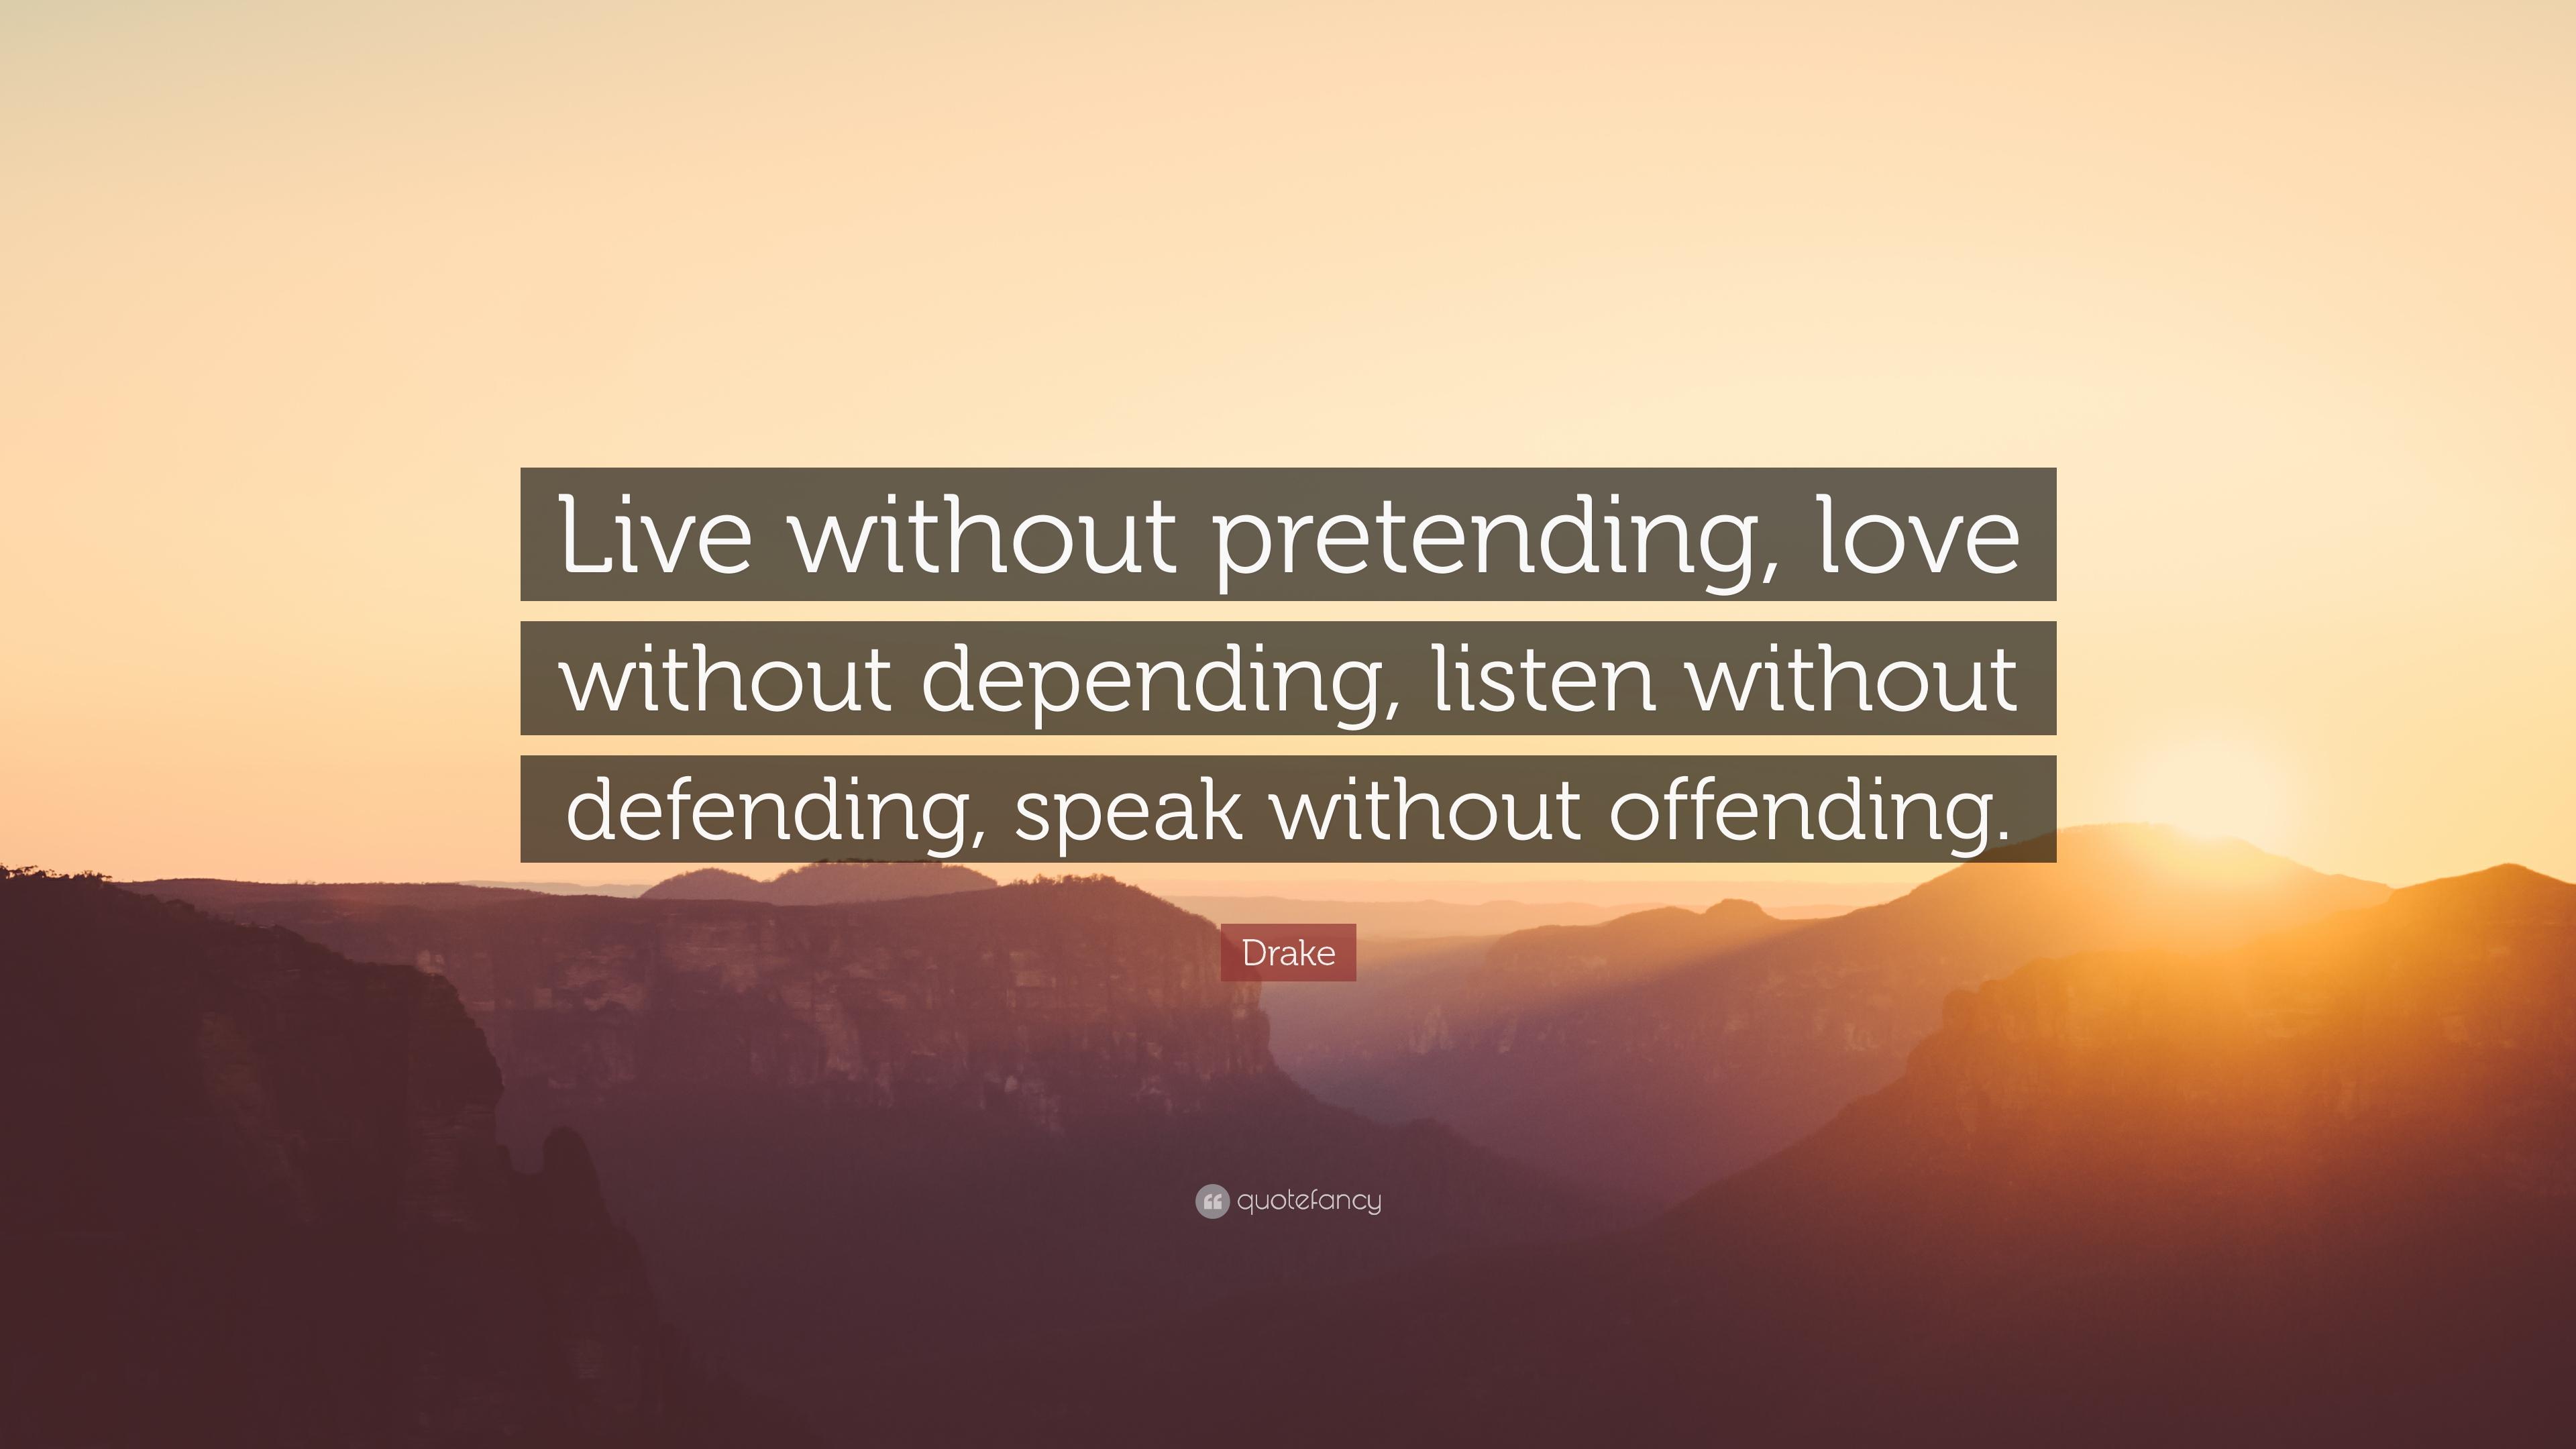 Drake Quote: “Live without pretending, love without depending